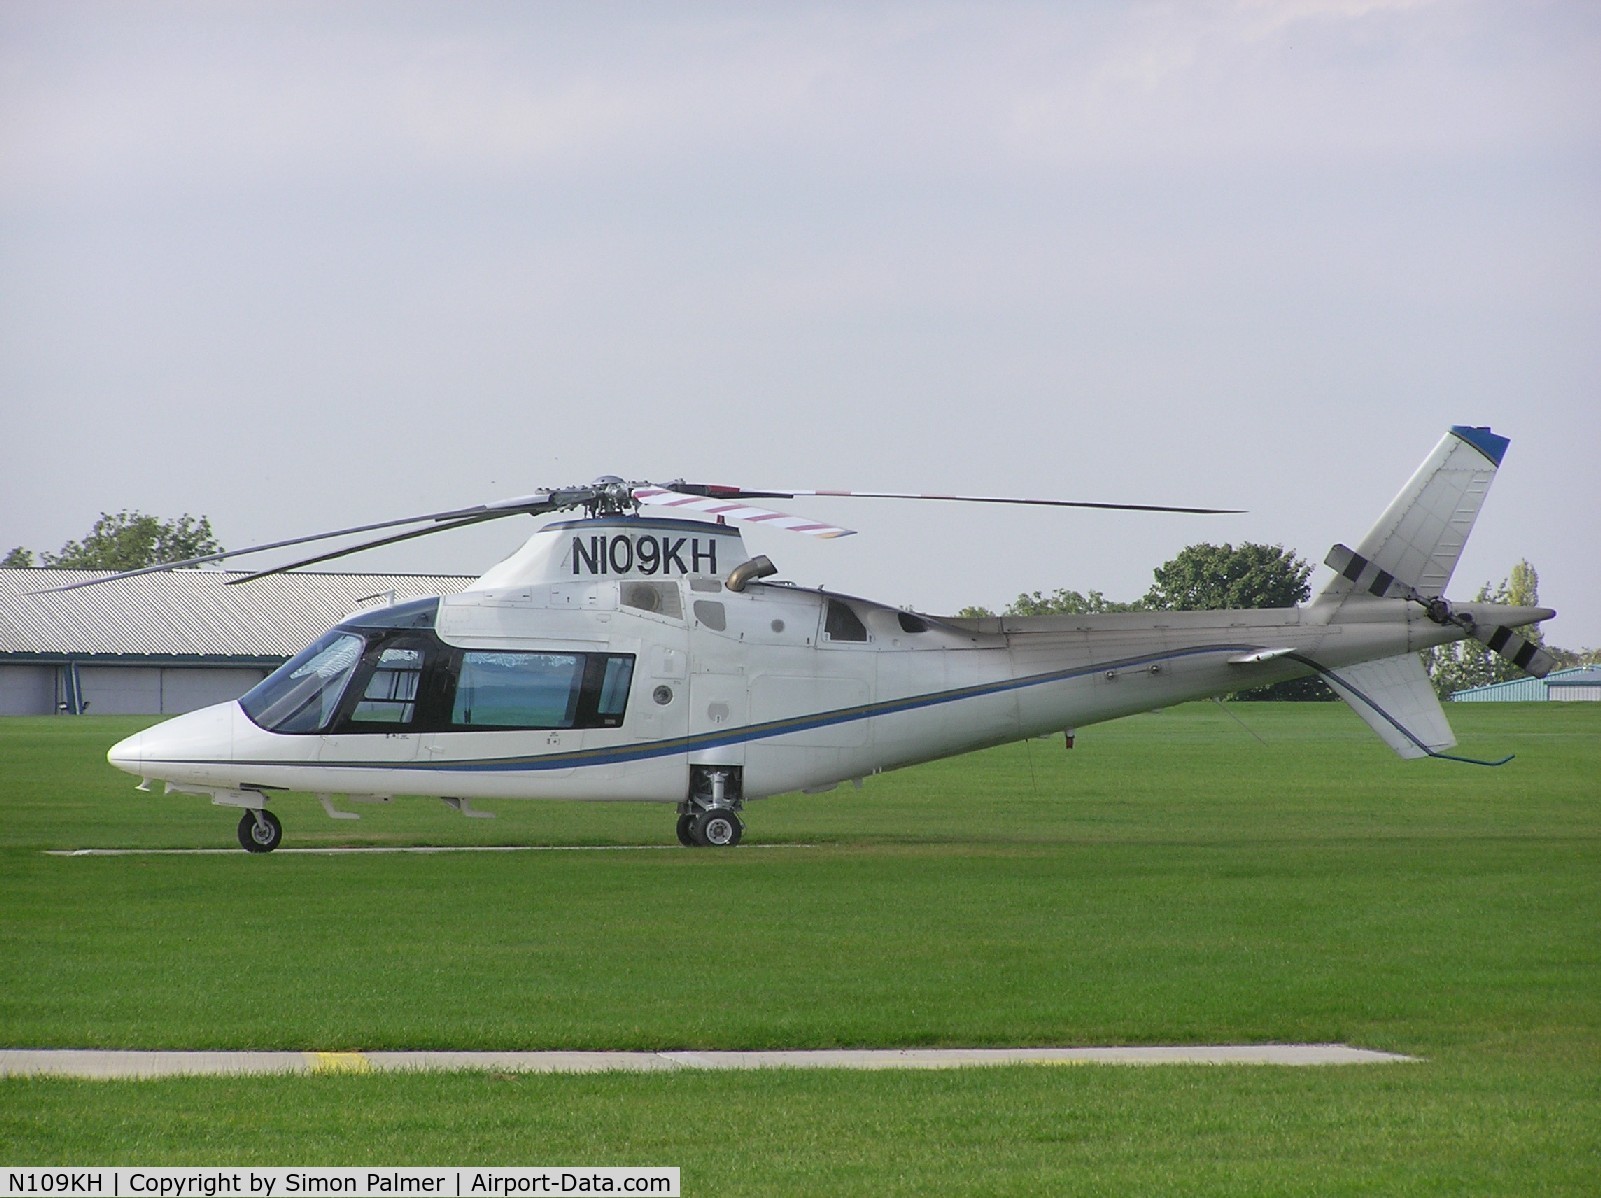 N109KH, 1990 Agusta A-109C C/N 7609, Agusta A109 at Sywell, Northamptonshire, UK